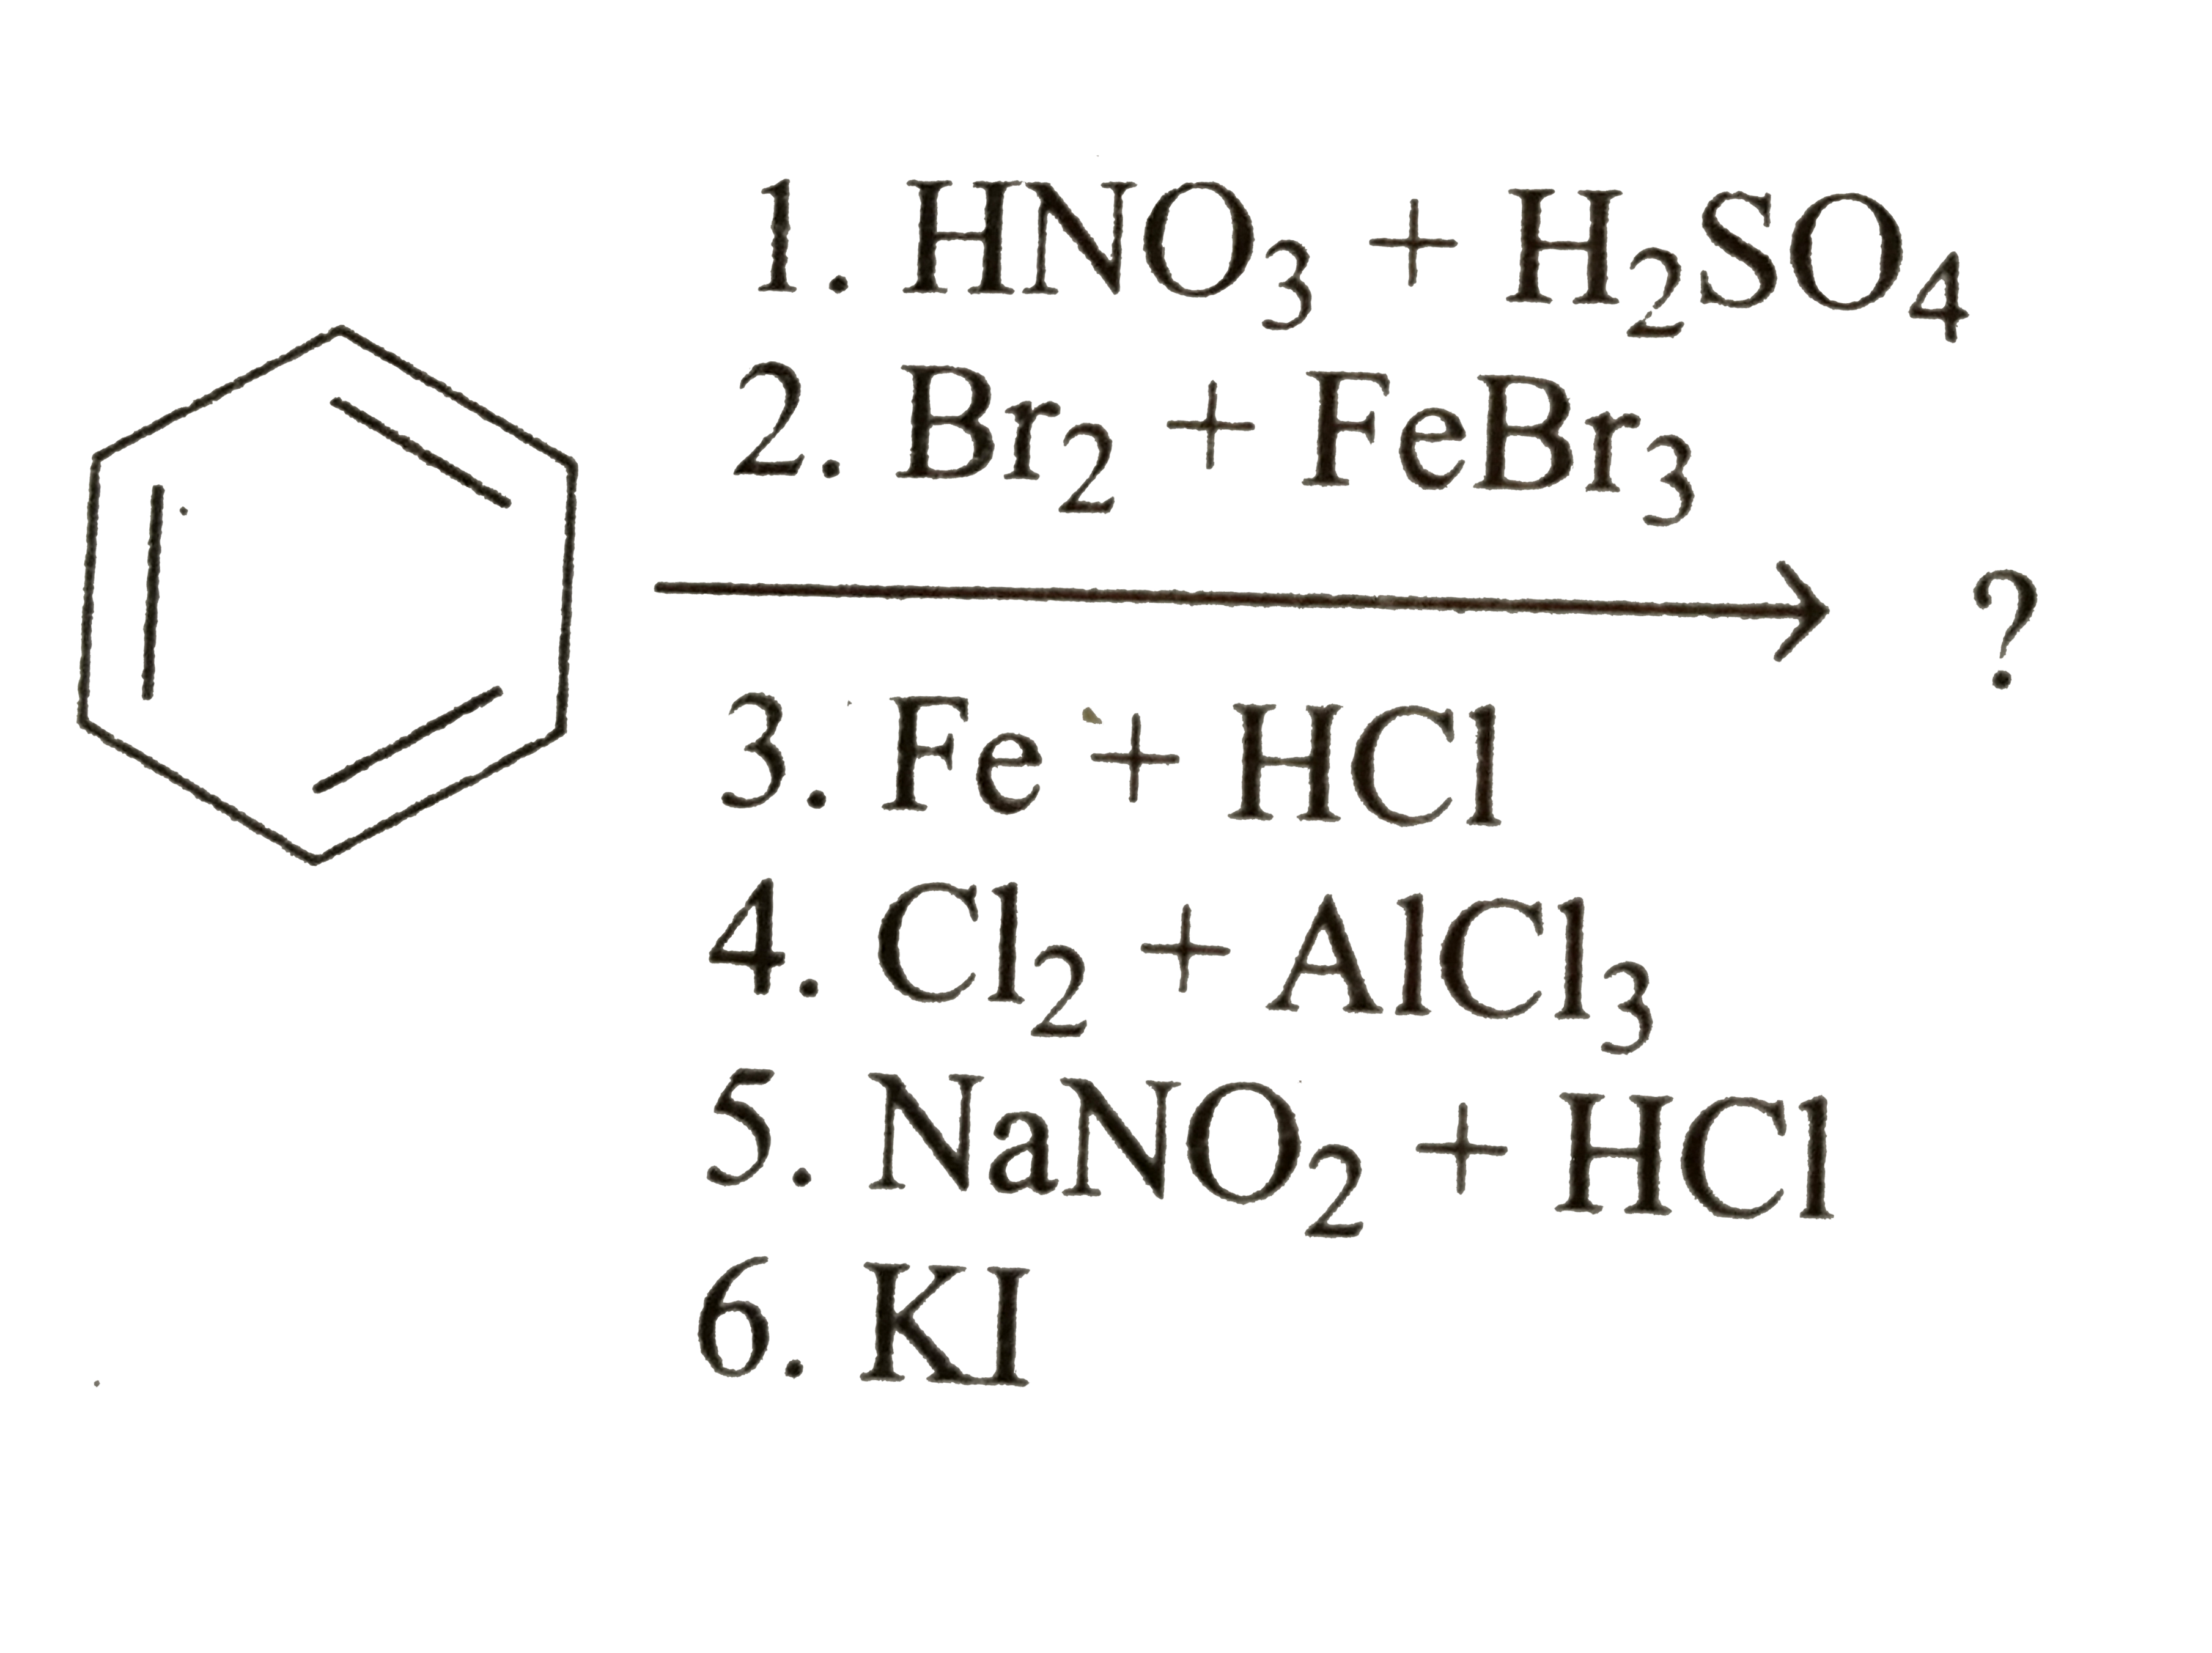 Idenitfy product obatined by following  sequence  of reactions :